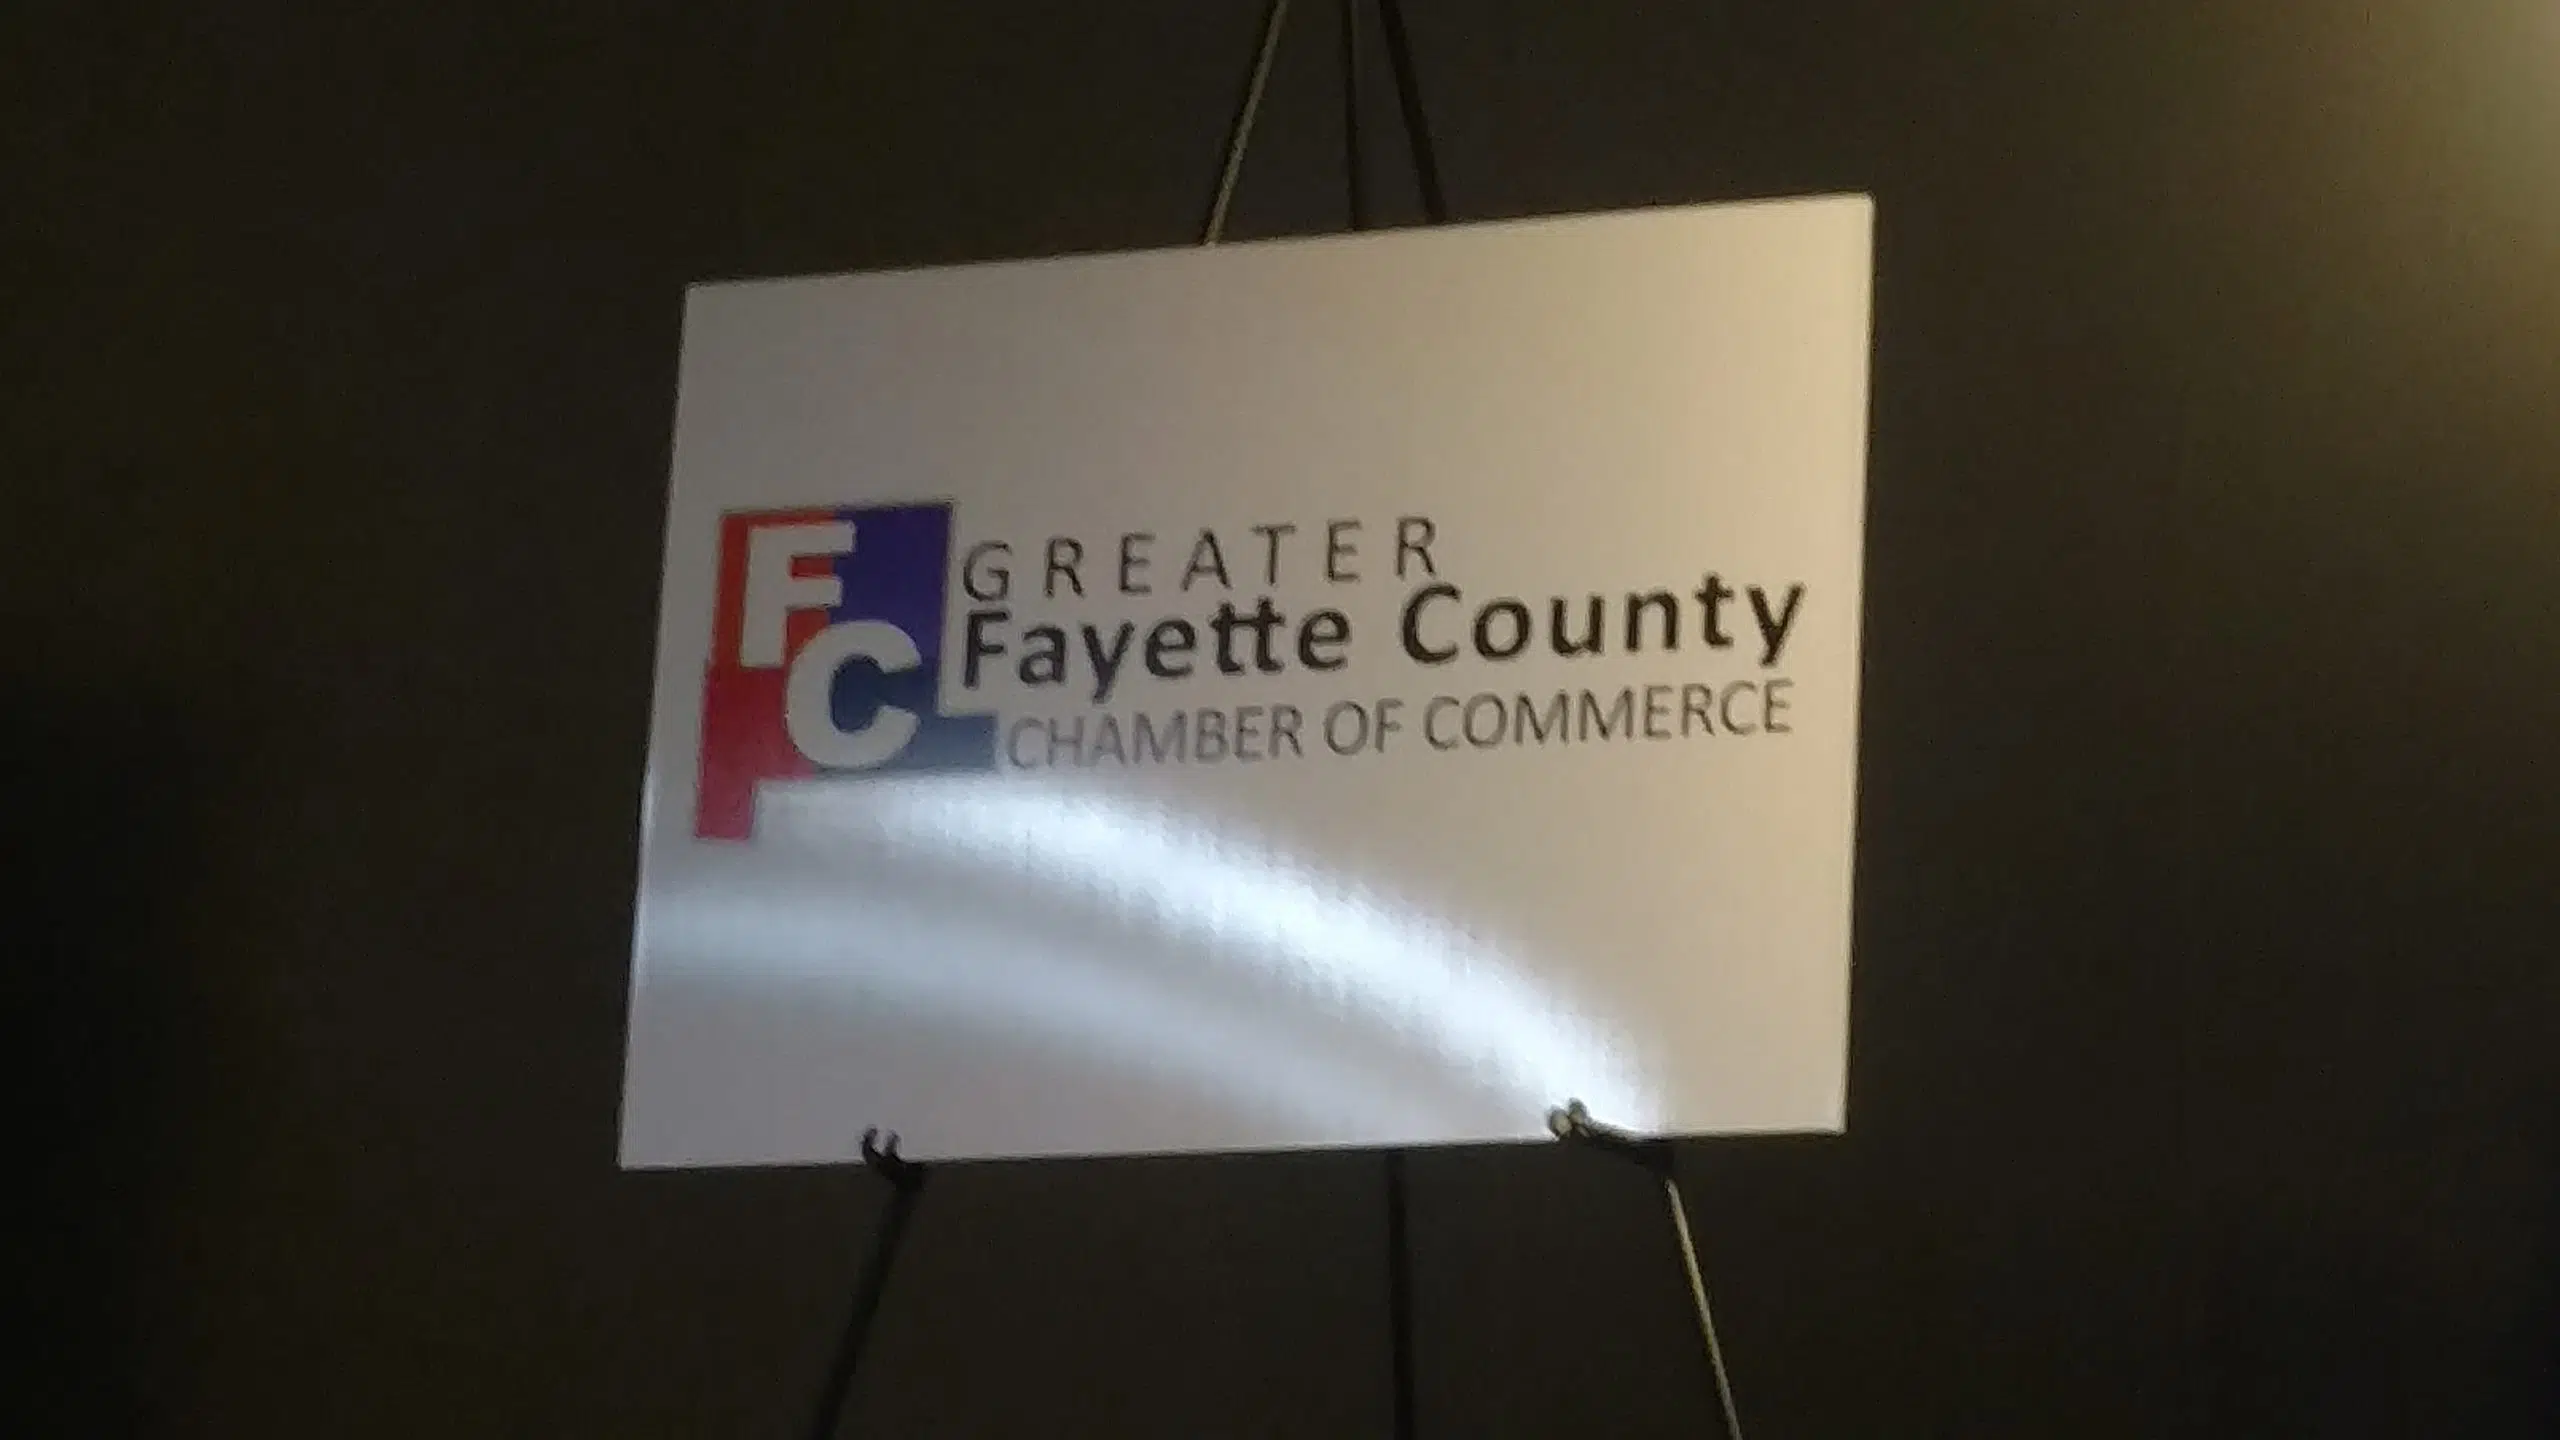 Hopkins, Wilber win Abe Awards--New Greater Fayette County Chamber logo unveiled 